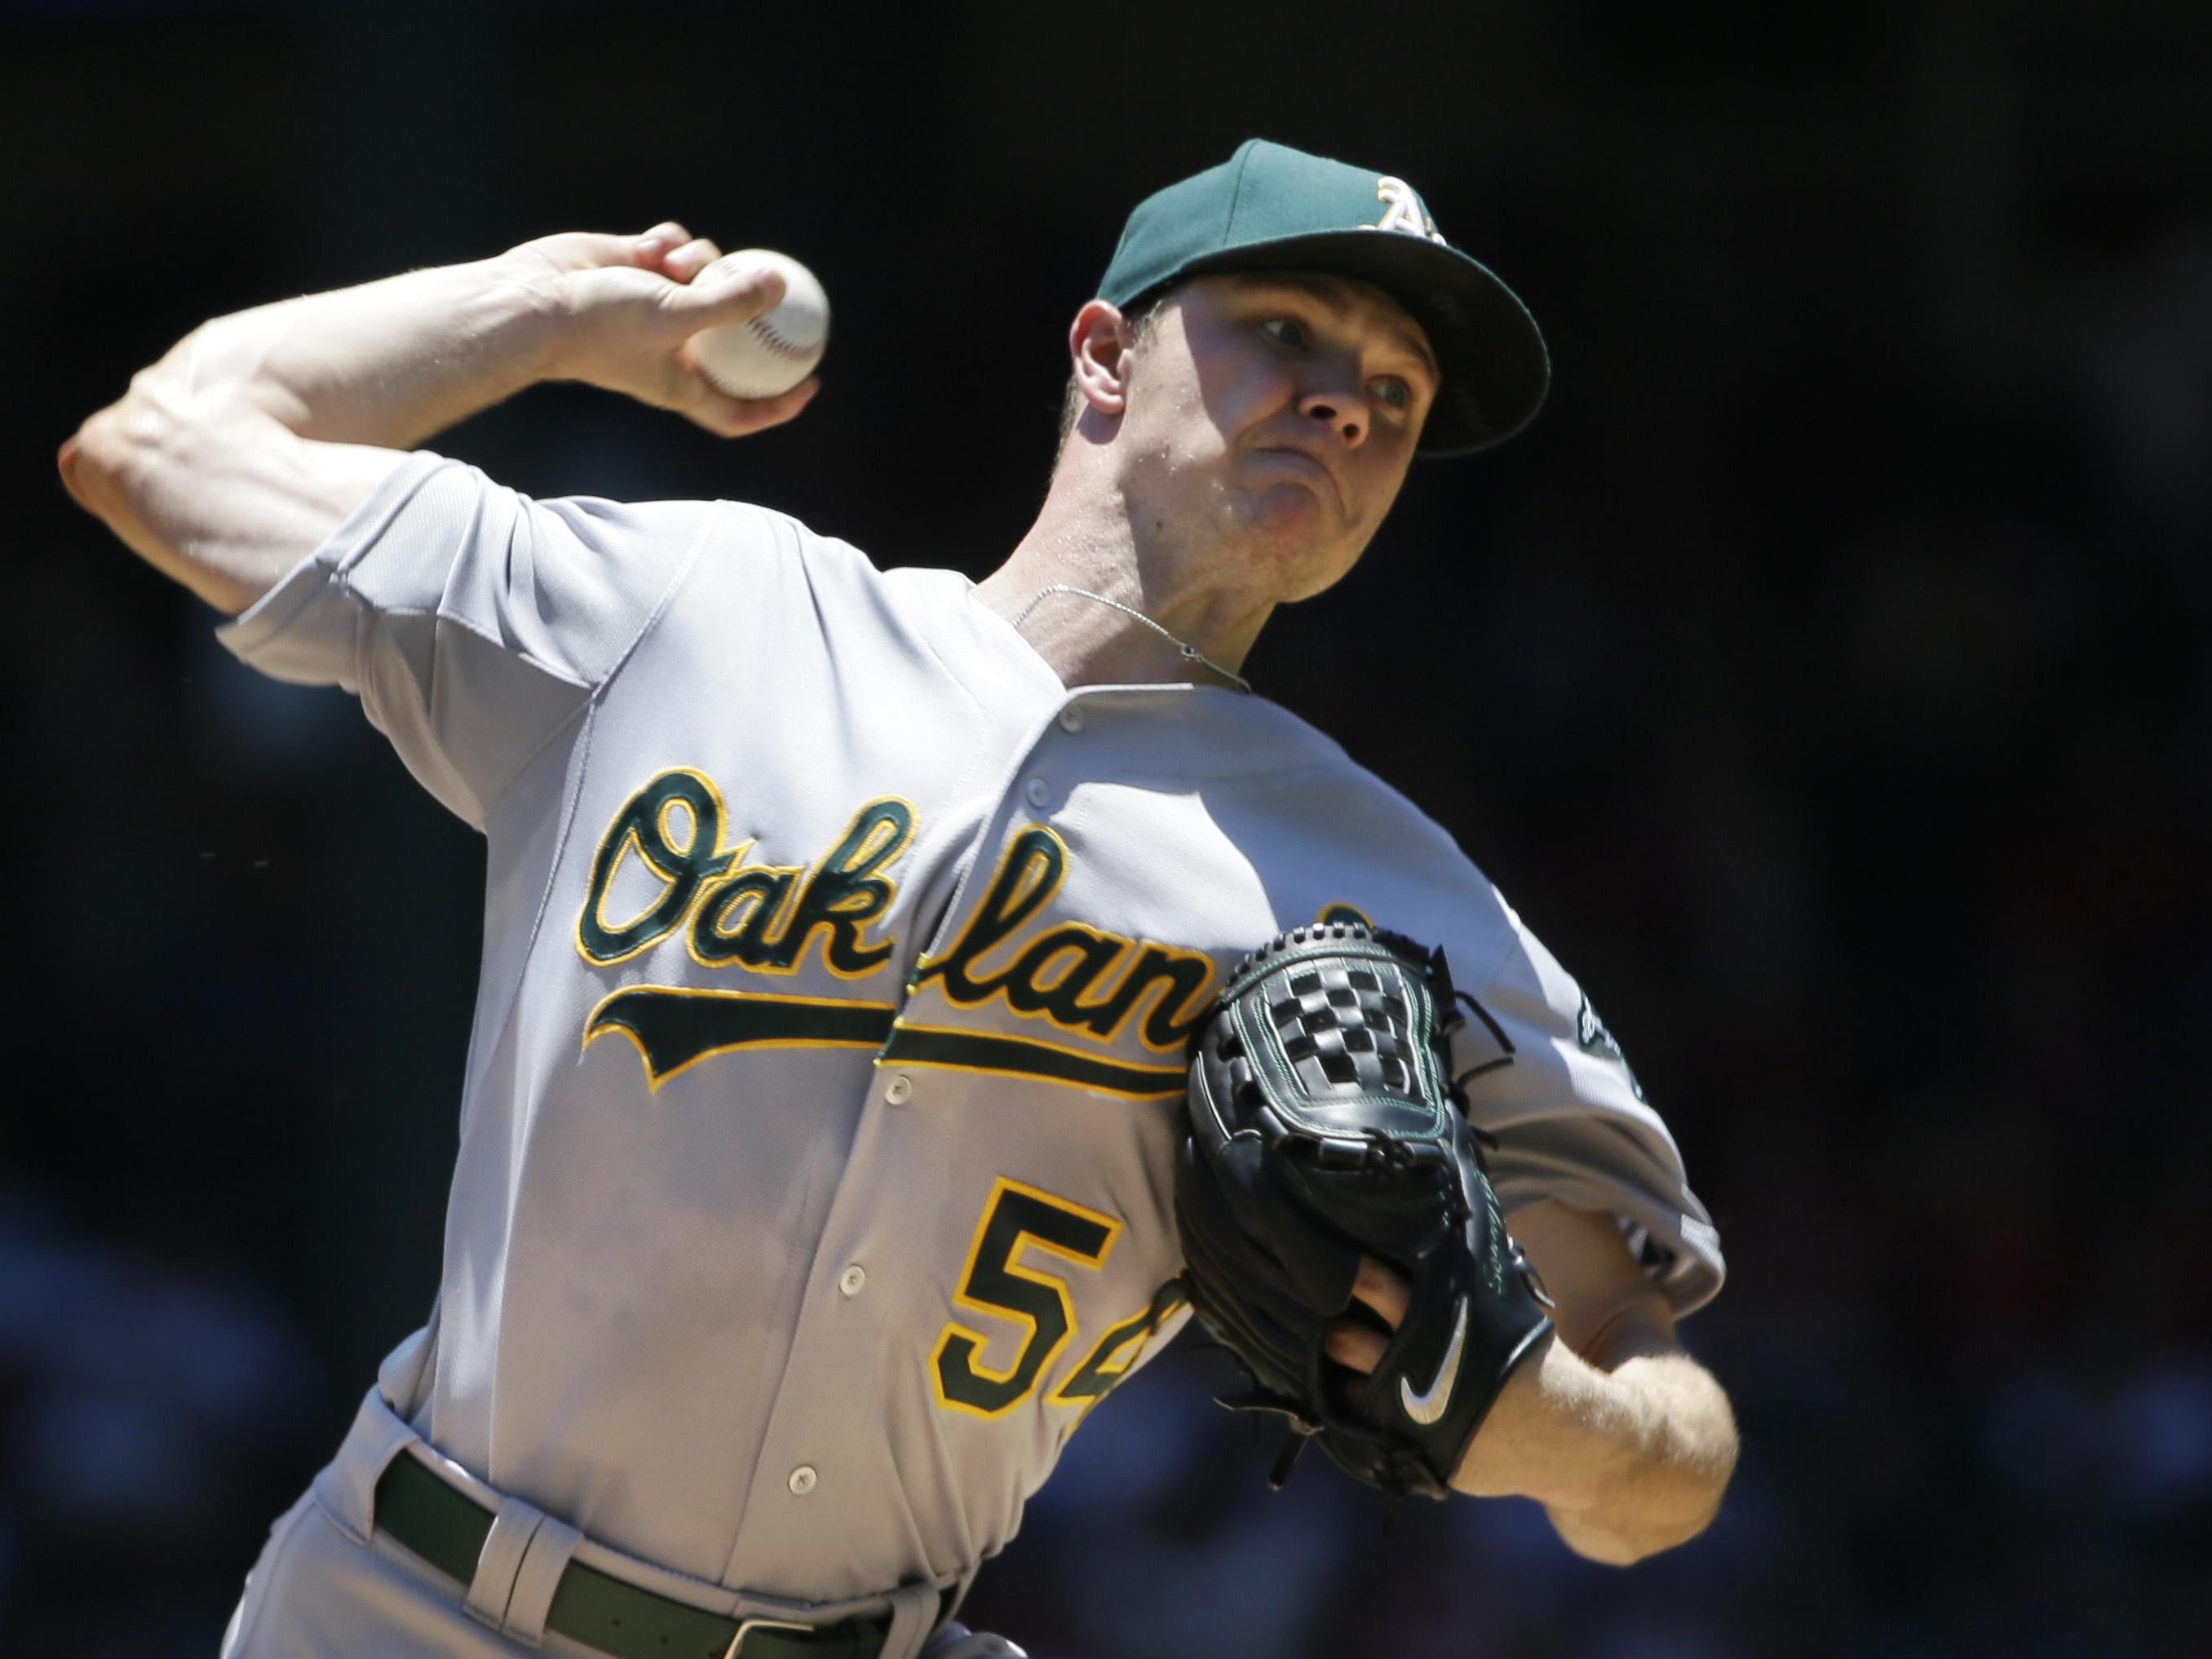 Sonny Gray was chosen for the MLB All-Star Game.